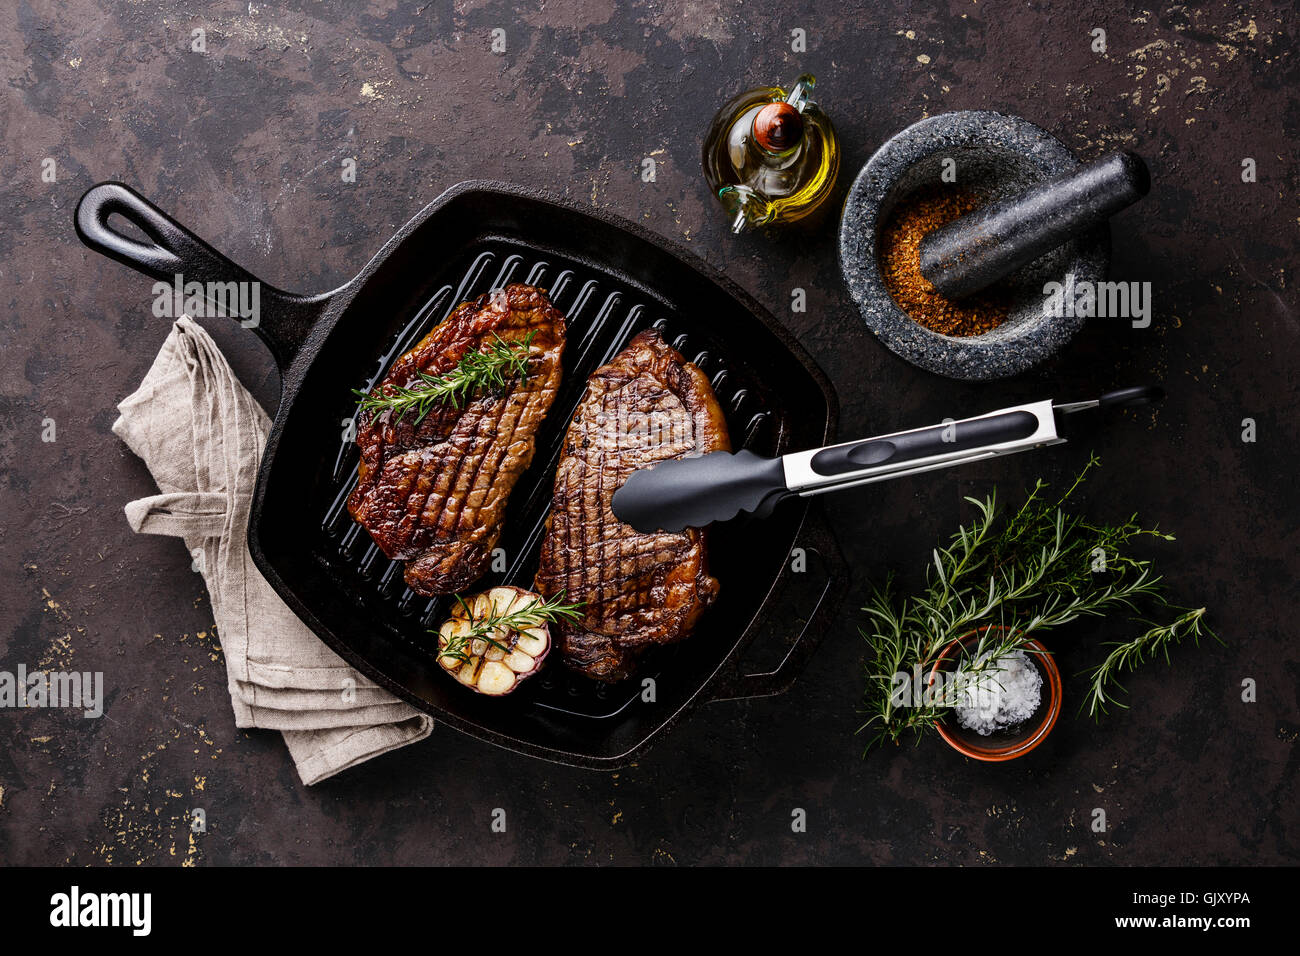 Grilled Black Angus Steak Striploin on frying cast iron Grill pan on dark background Stock Photo